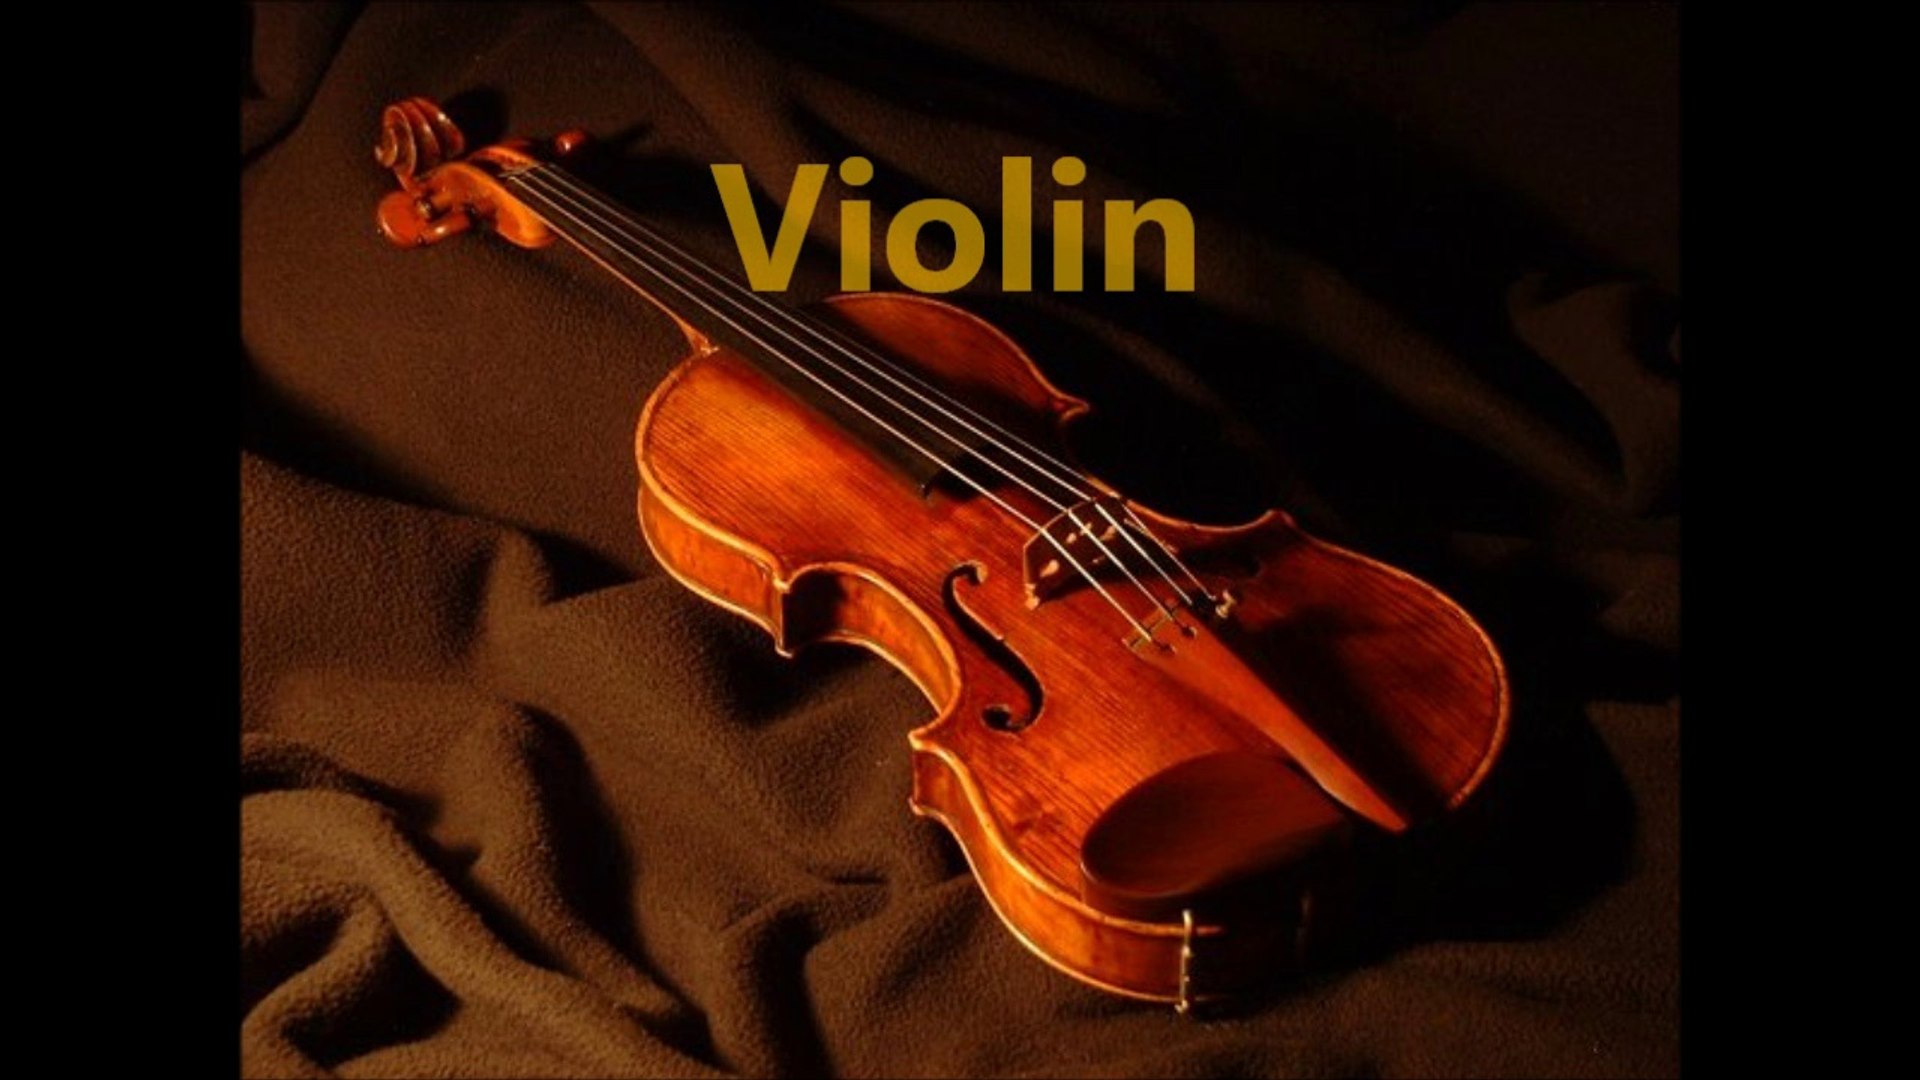 Musical Instruments Sounds - video Dailymotion